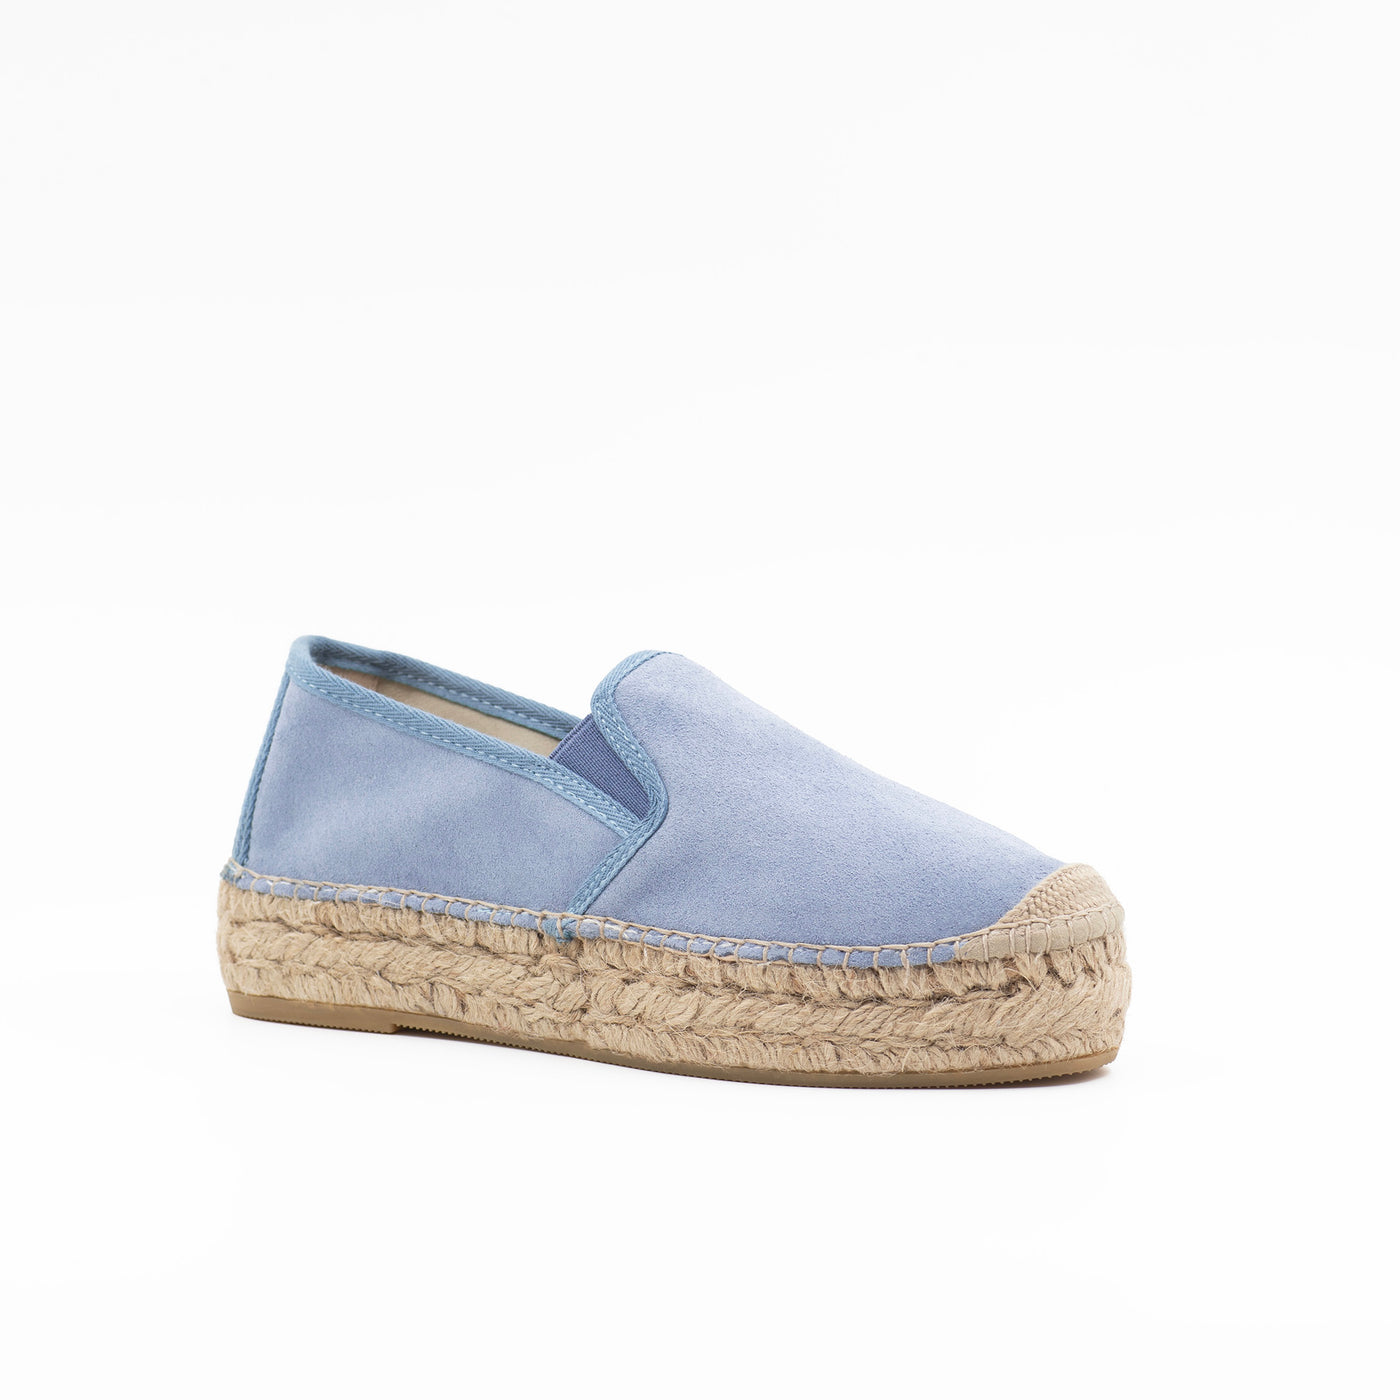 Espadrilles with chunky sole